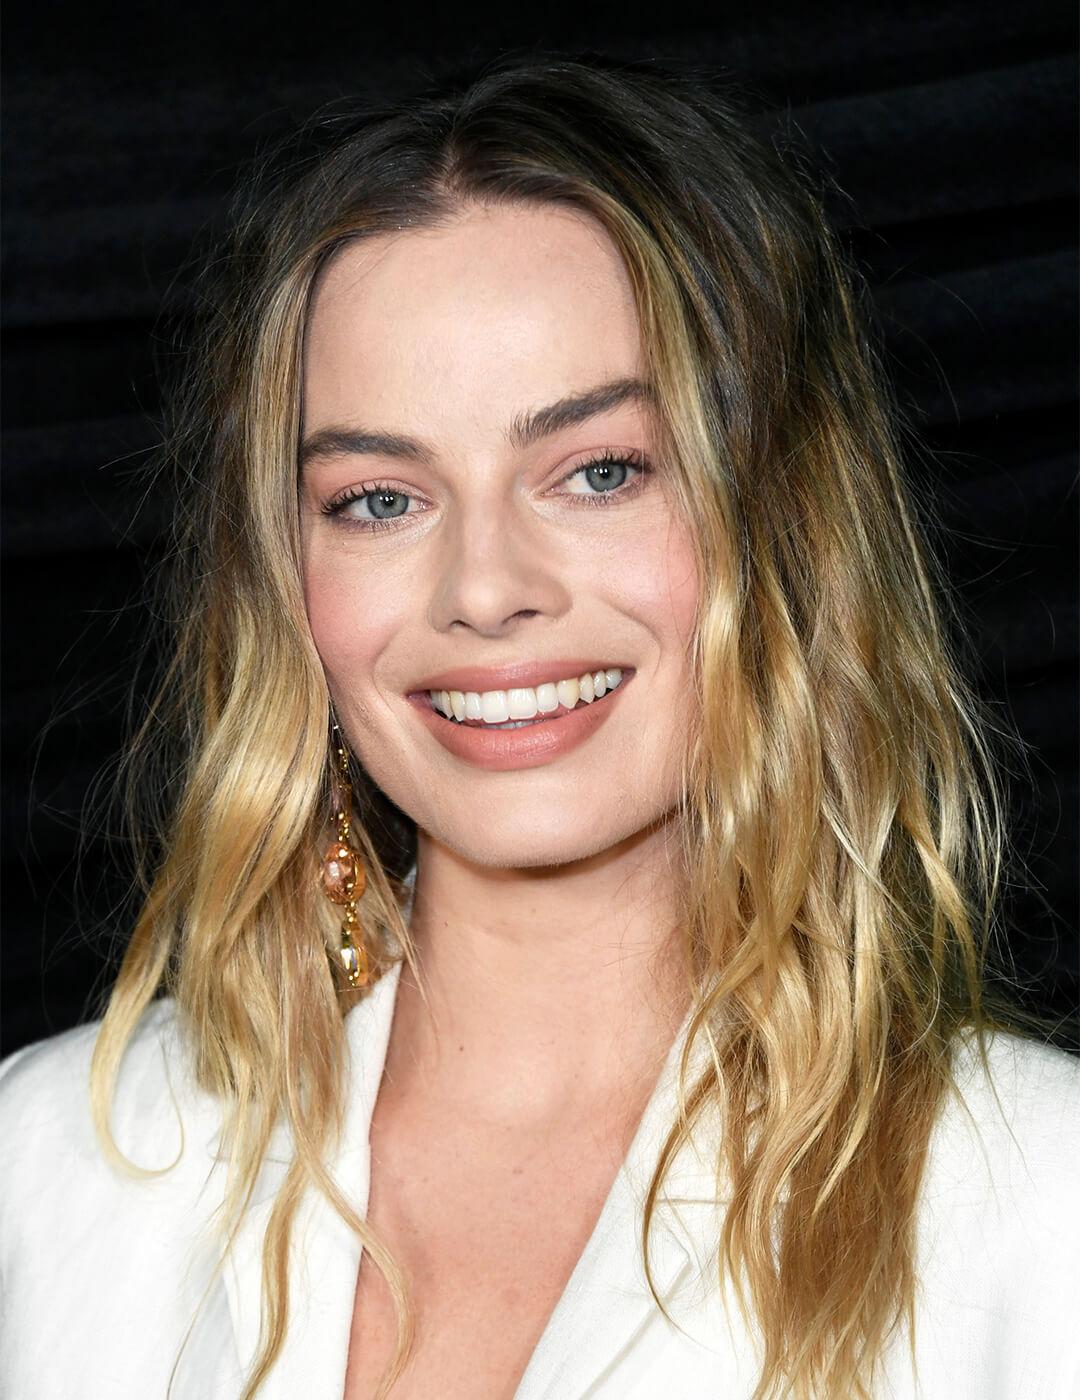 Margot Robbie wearing a white suit and loose waves hairstyle smiling